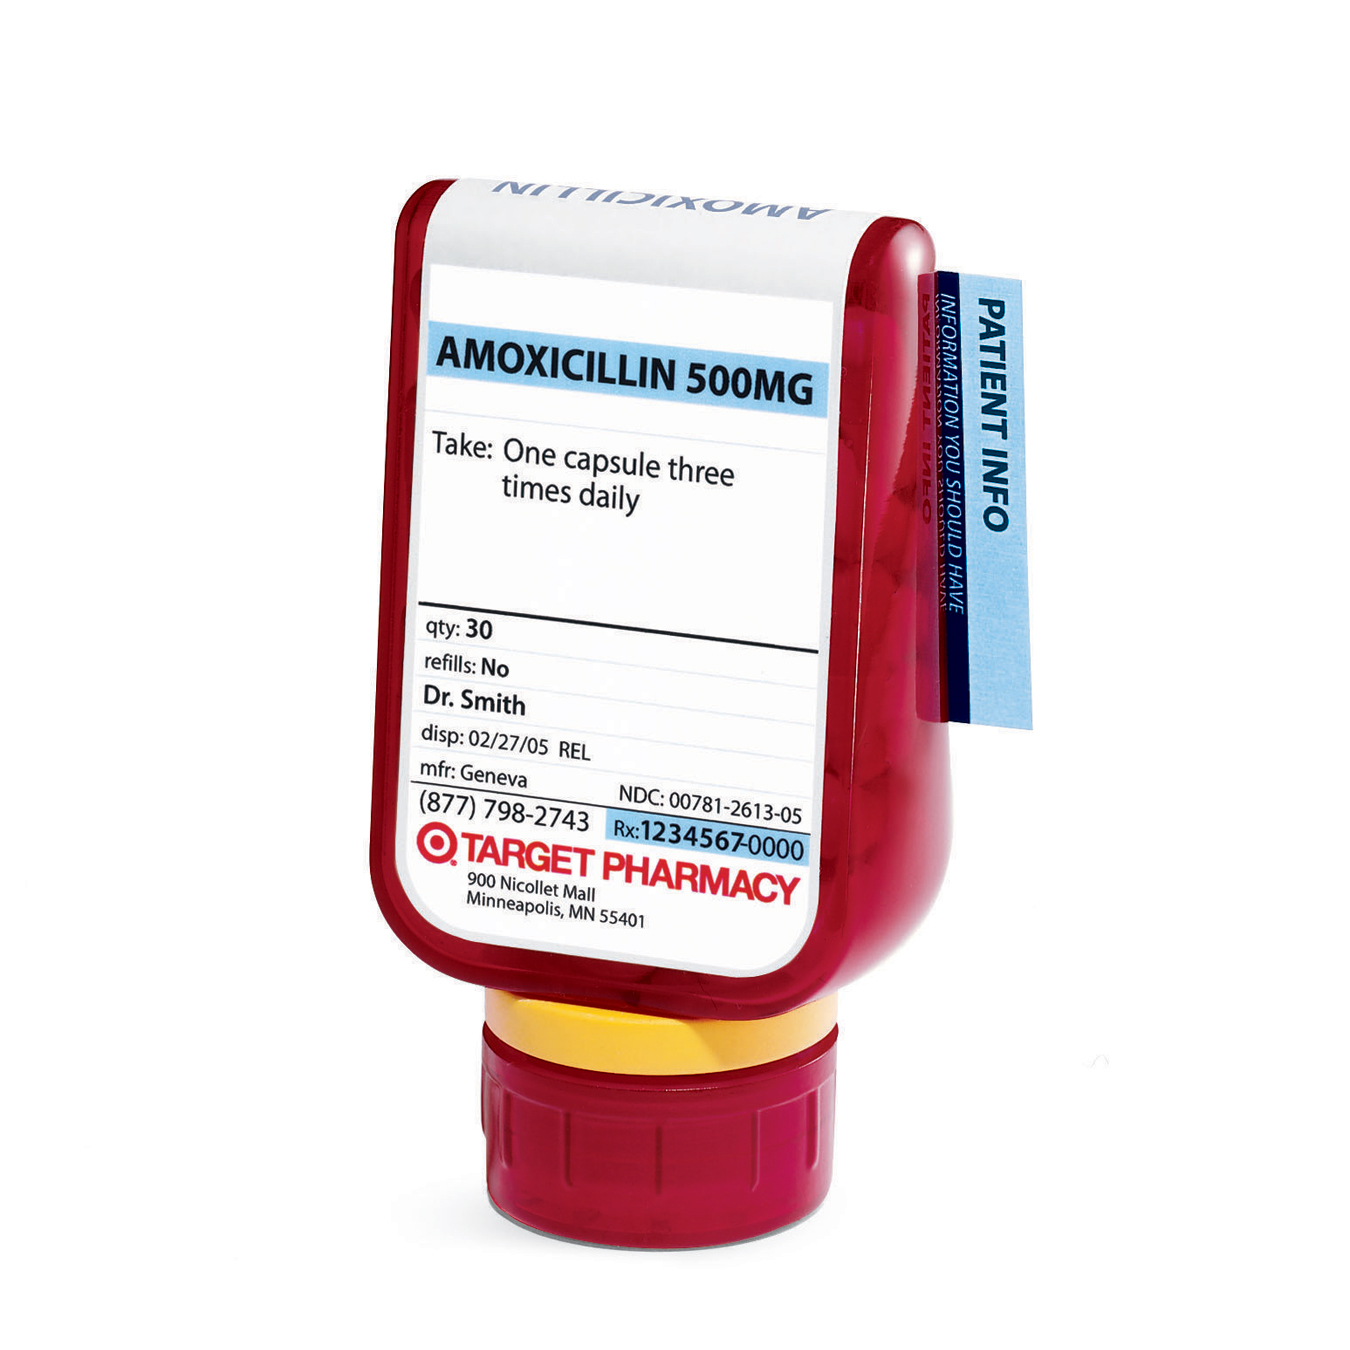 An image of Deborah Adler’s ClearRx Medication System, a pill bottle design that prioritizes the information needed by a patient through scale and color.